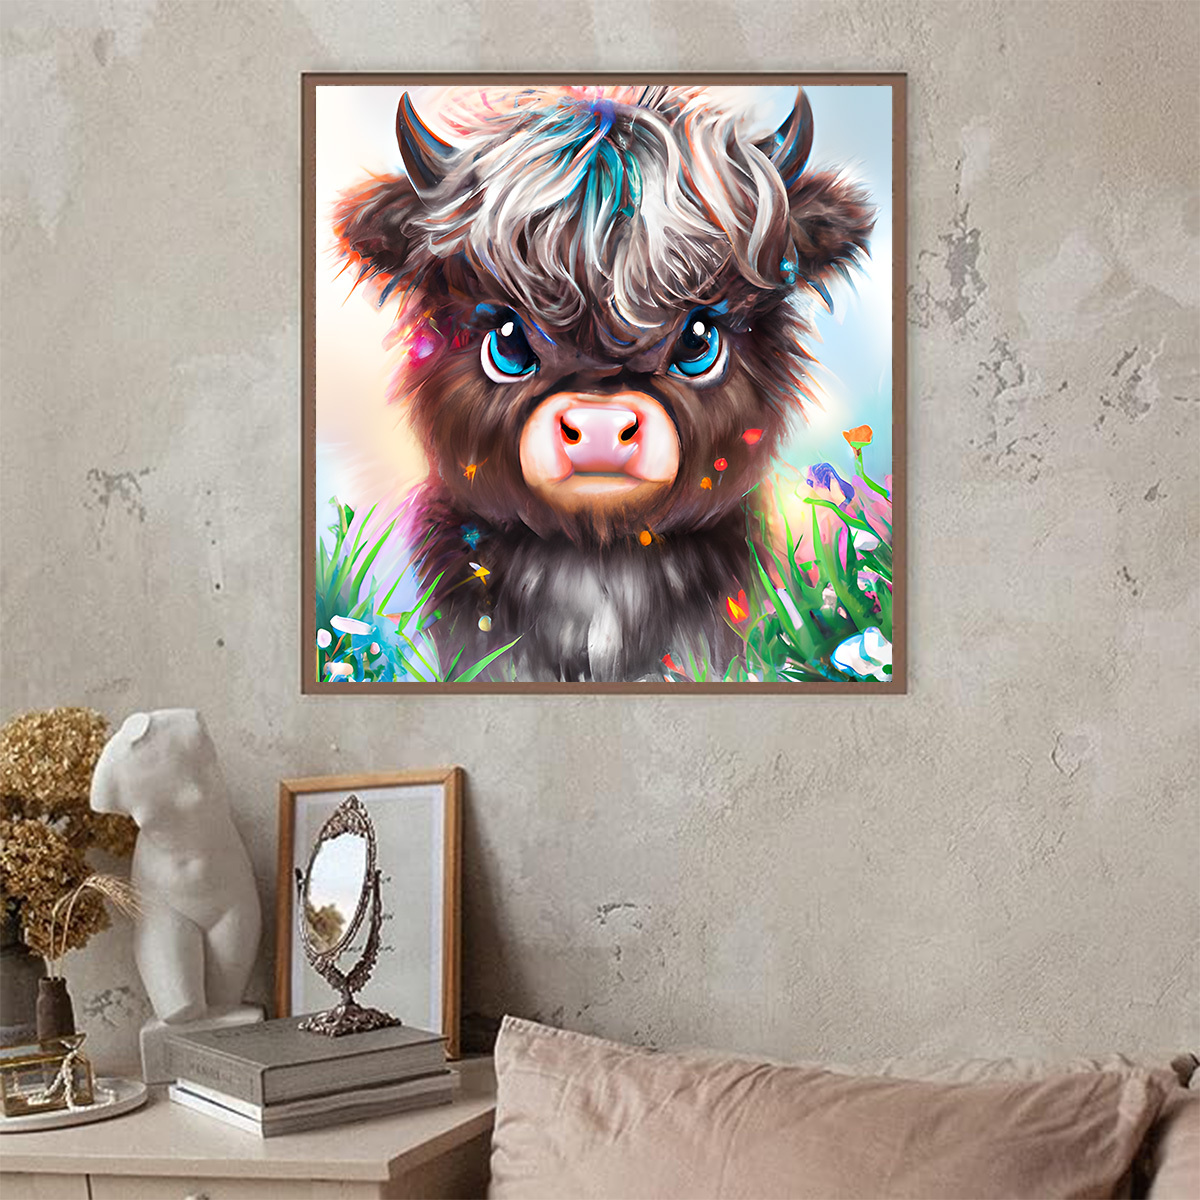  bleihum Highland Cow Diamond Art for Adults-Highland Cow  Diamond Art Kits for Adults,5D Gem Painting for Adults,Full Drill Paint by  Diamonds,DIY Gem Art for Home Wall Decor Gifts(14 * 14inch) 